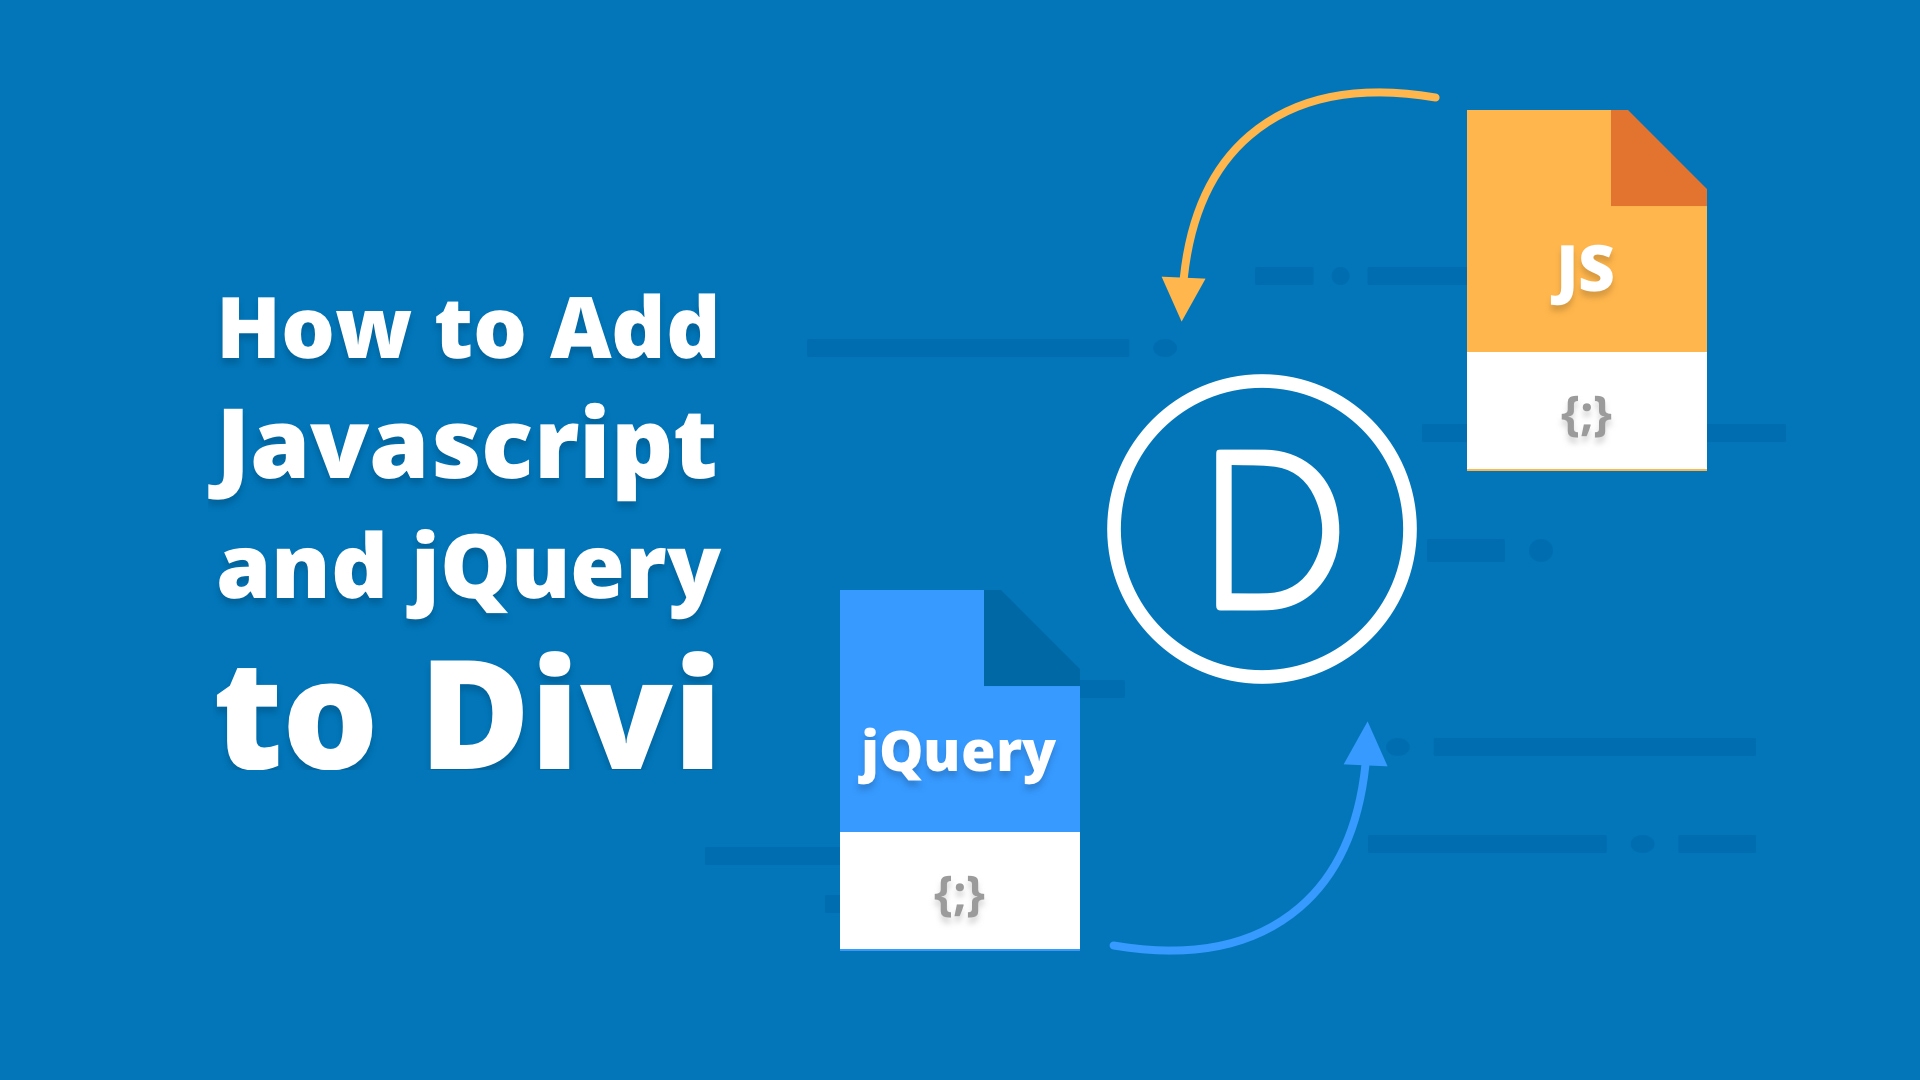 Jquery wordpress. Js JQUERY. Append js. How to add in js.